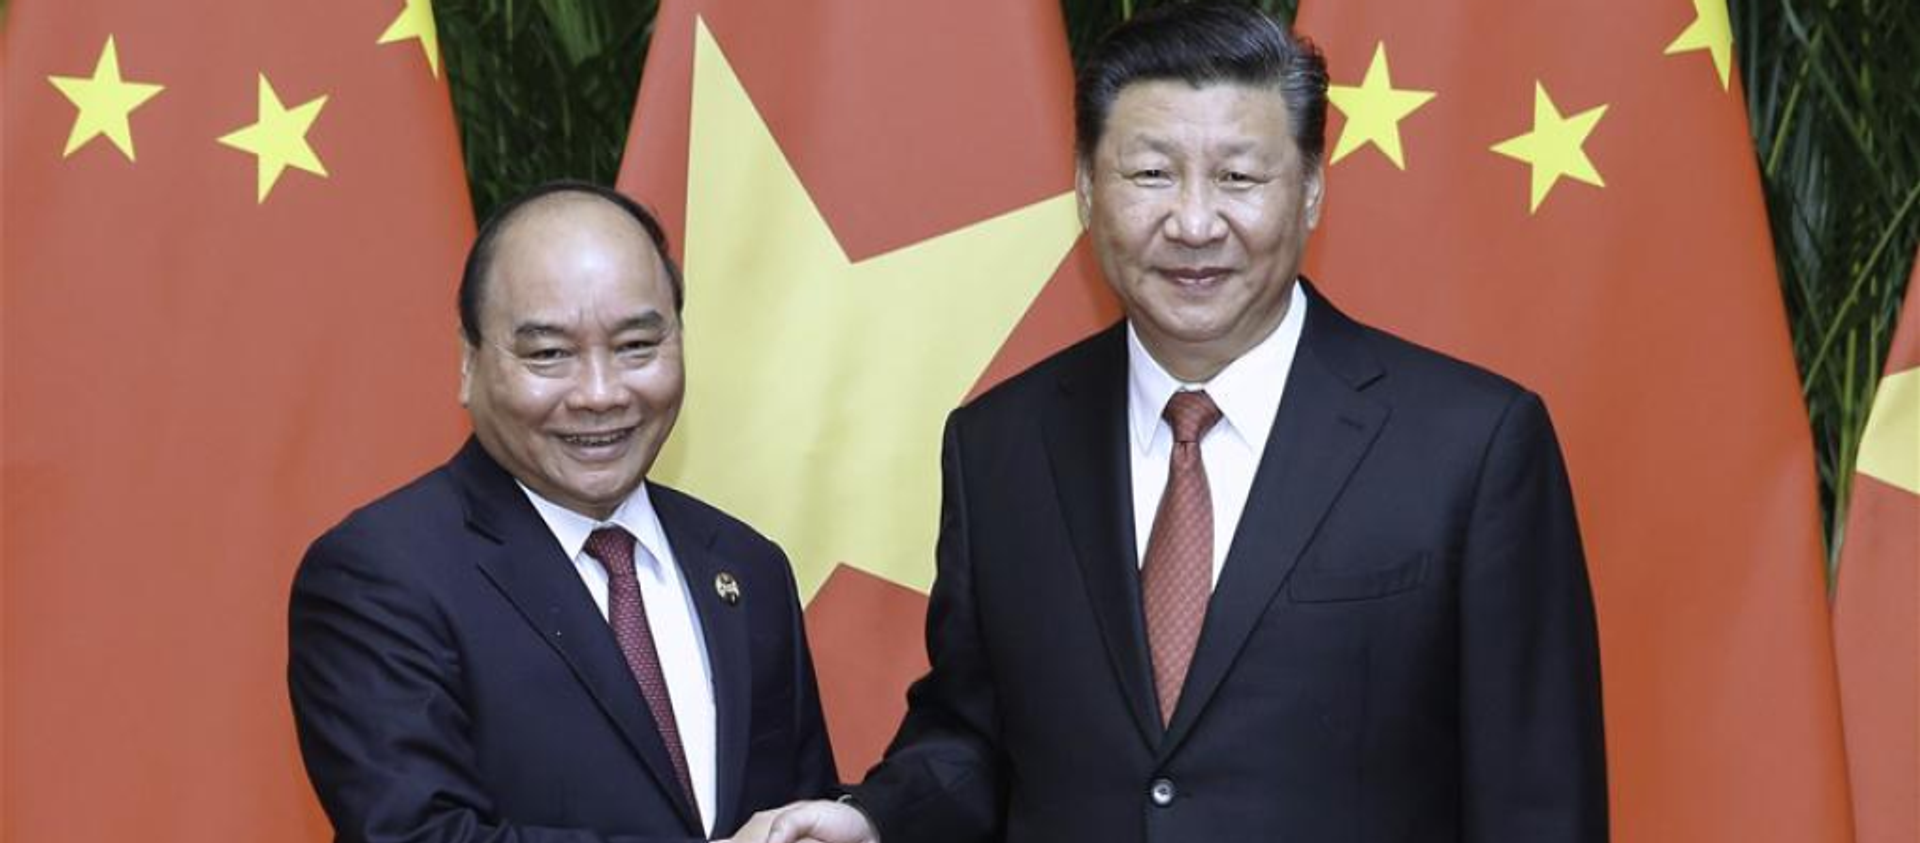 Chinese President Xi Jinping on Sunday met with Vietnamese Prime Minister Nguyen Xuan Phuc, who will attend the first China International Import Expo (CIIE) opening Monday in Shanghai, Nov. 4, 2018. - Sputnik International, 1920, 03.06.2021